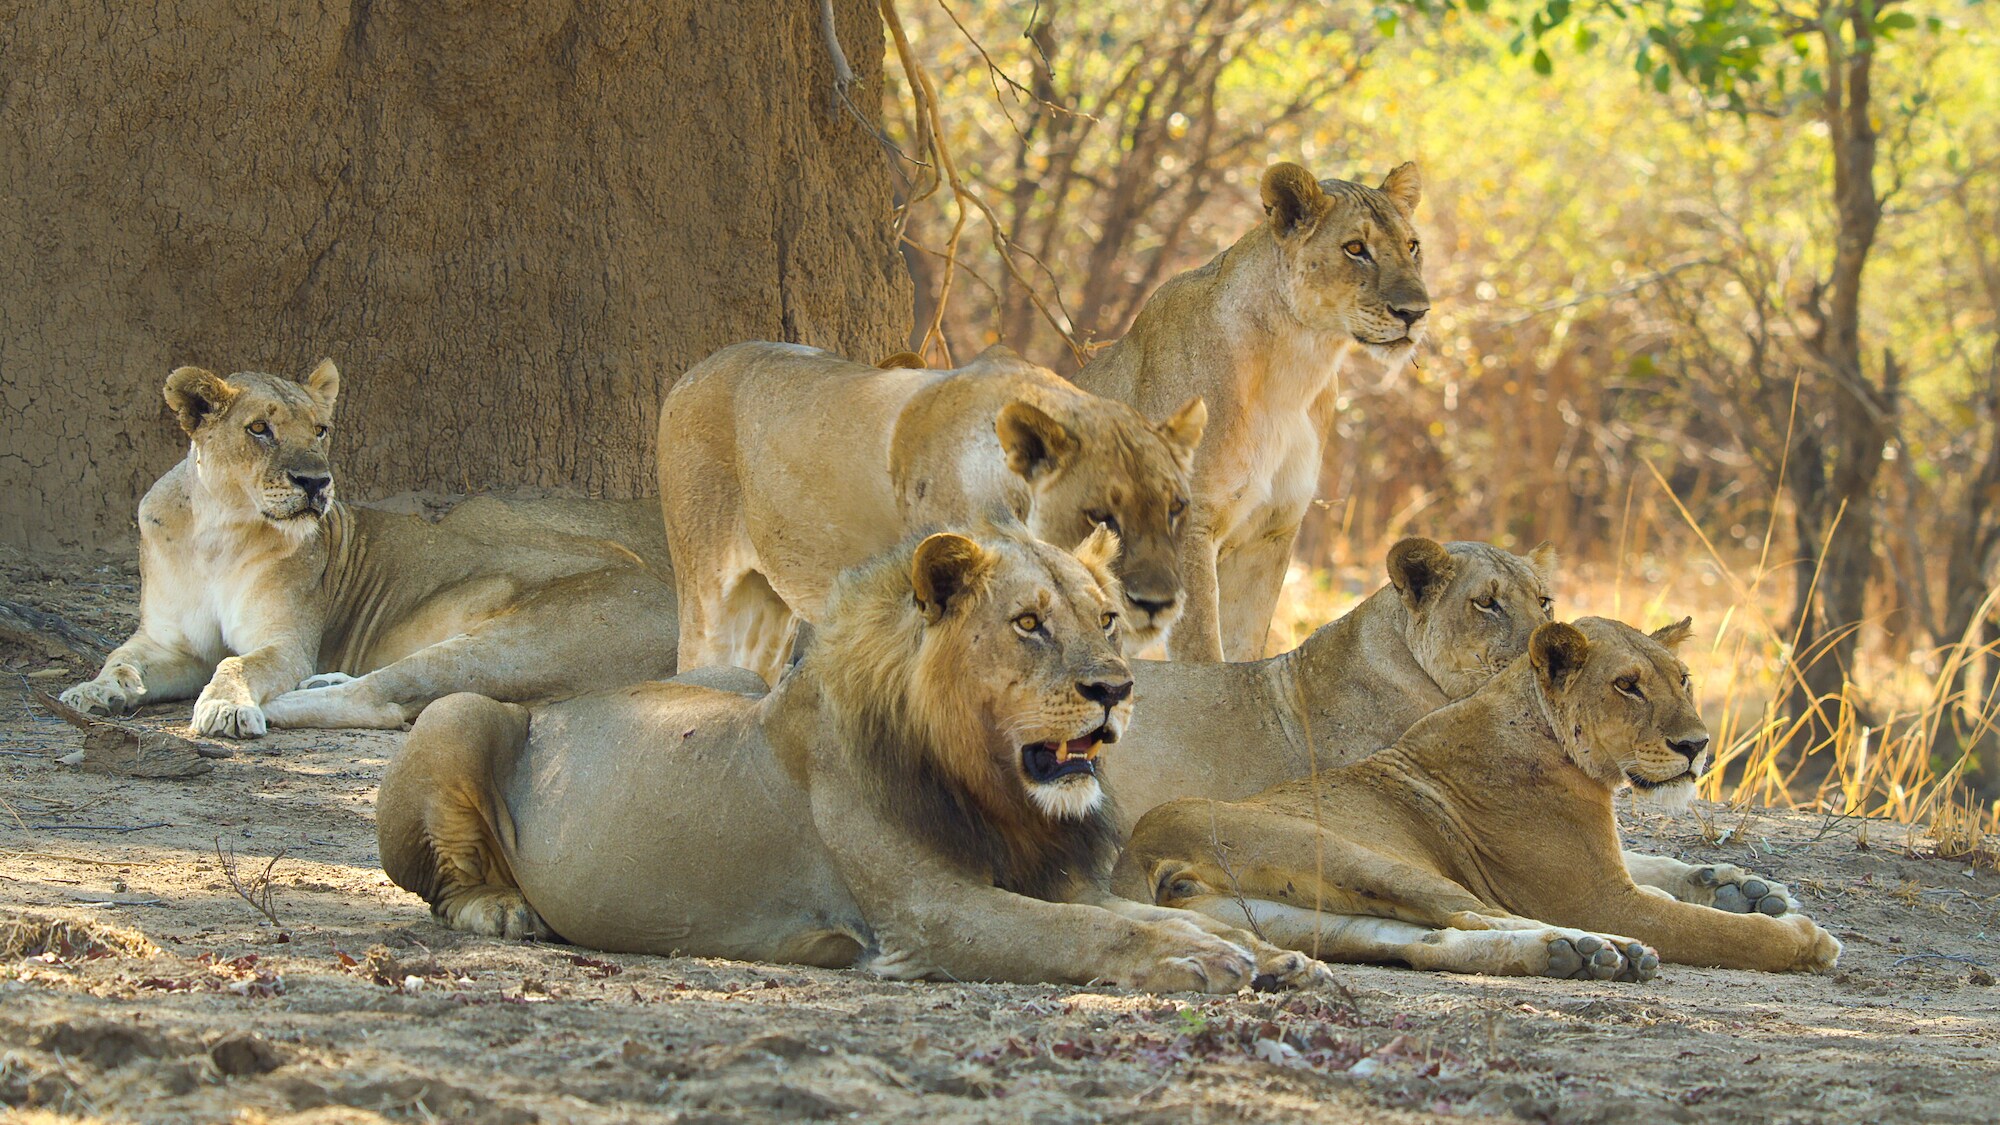 A pride of lions watch as an opportunity for a hunt arises. (Credit: National Geographic/Bertie Gregory for Disney+)